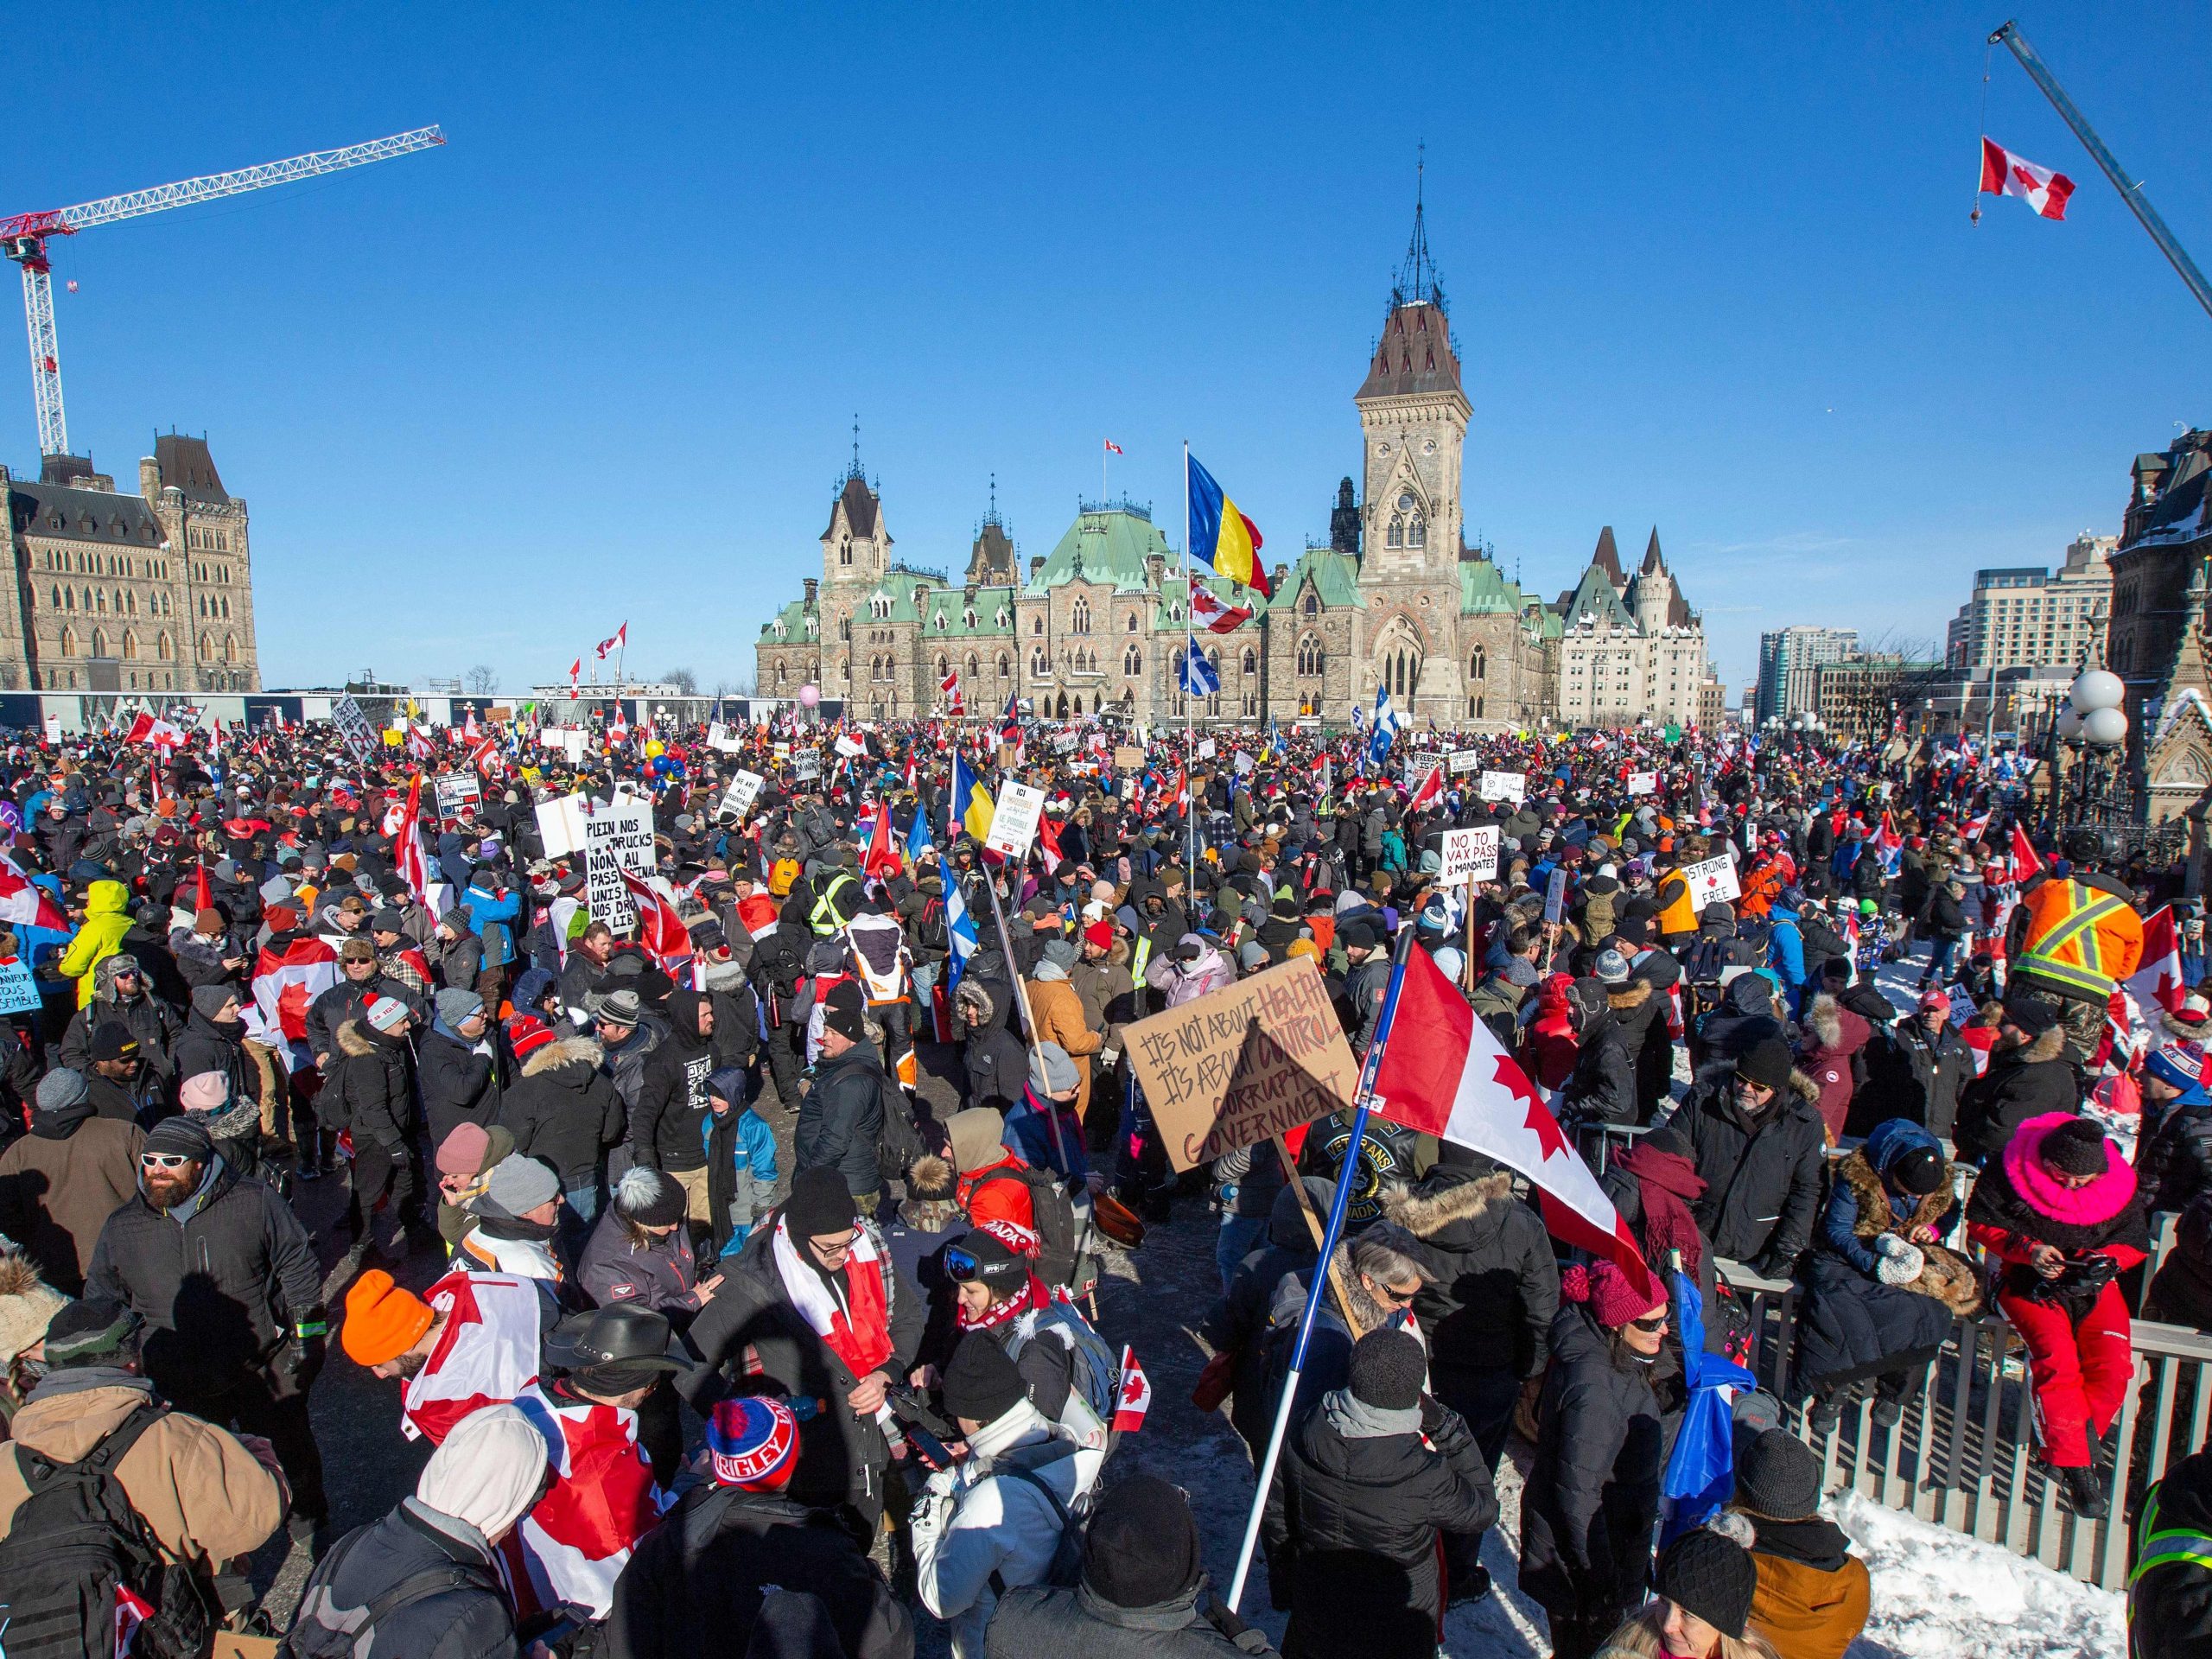 Supporters fill the street at Parliament Hill for the Freedom Truck Convoy to protest against Covid-19 vaccine mandates and restrictions in Ottawa, Canada, on January 29, 2022.